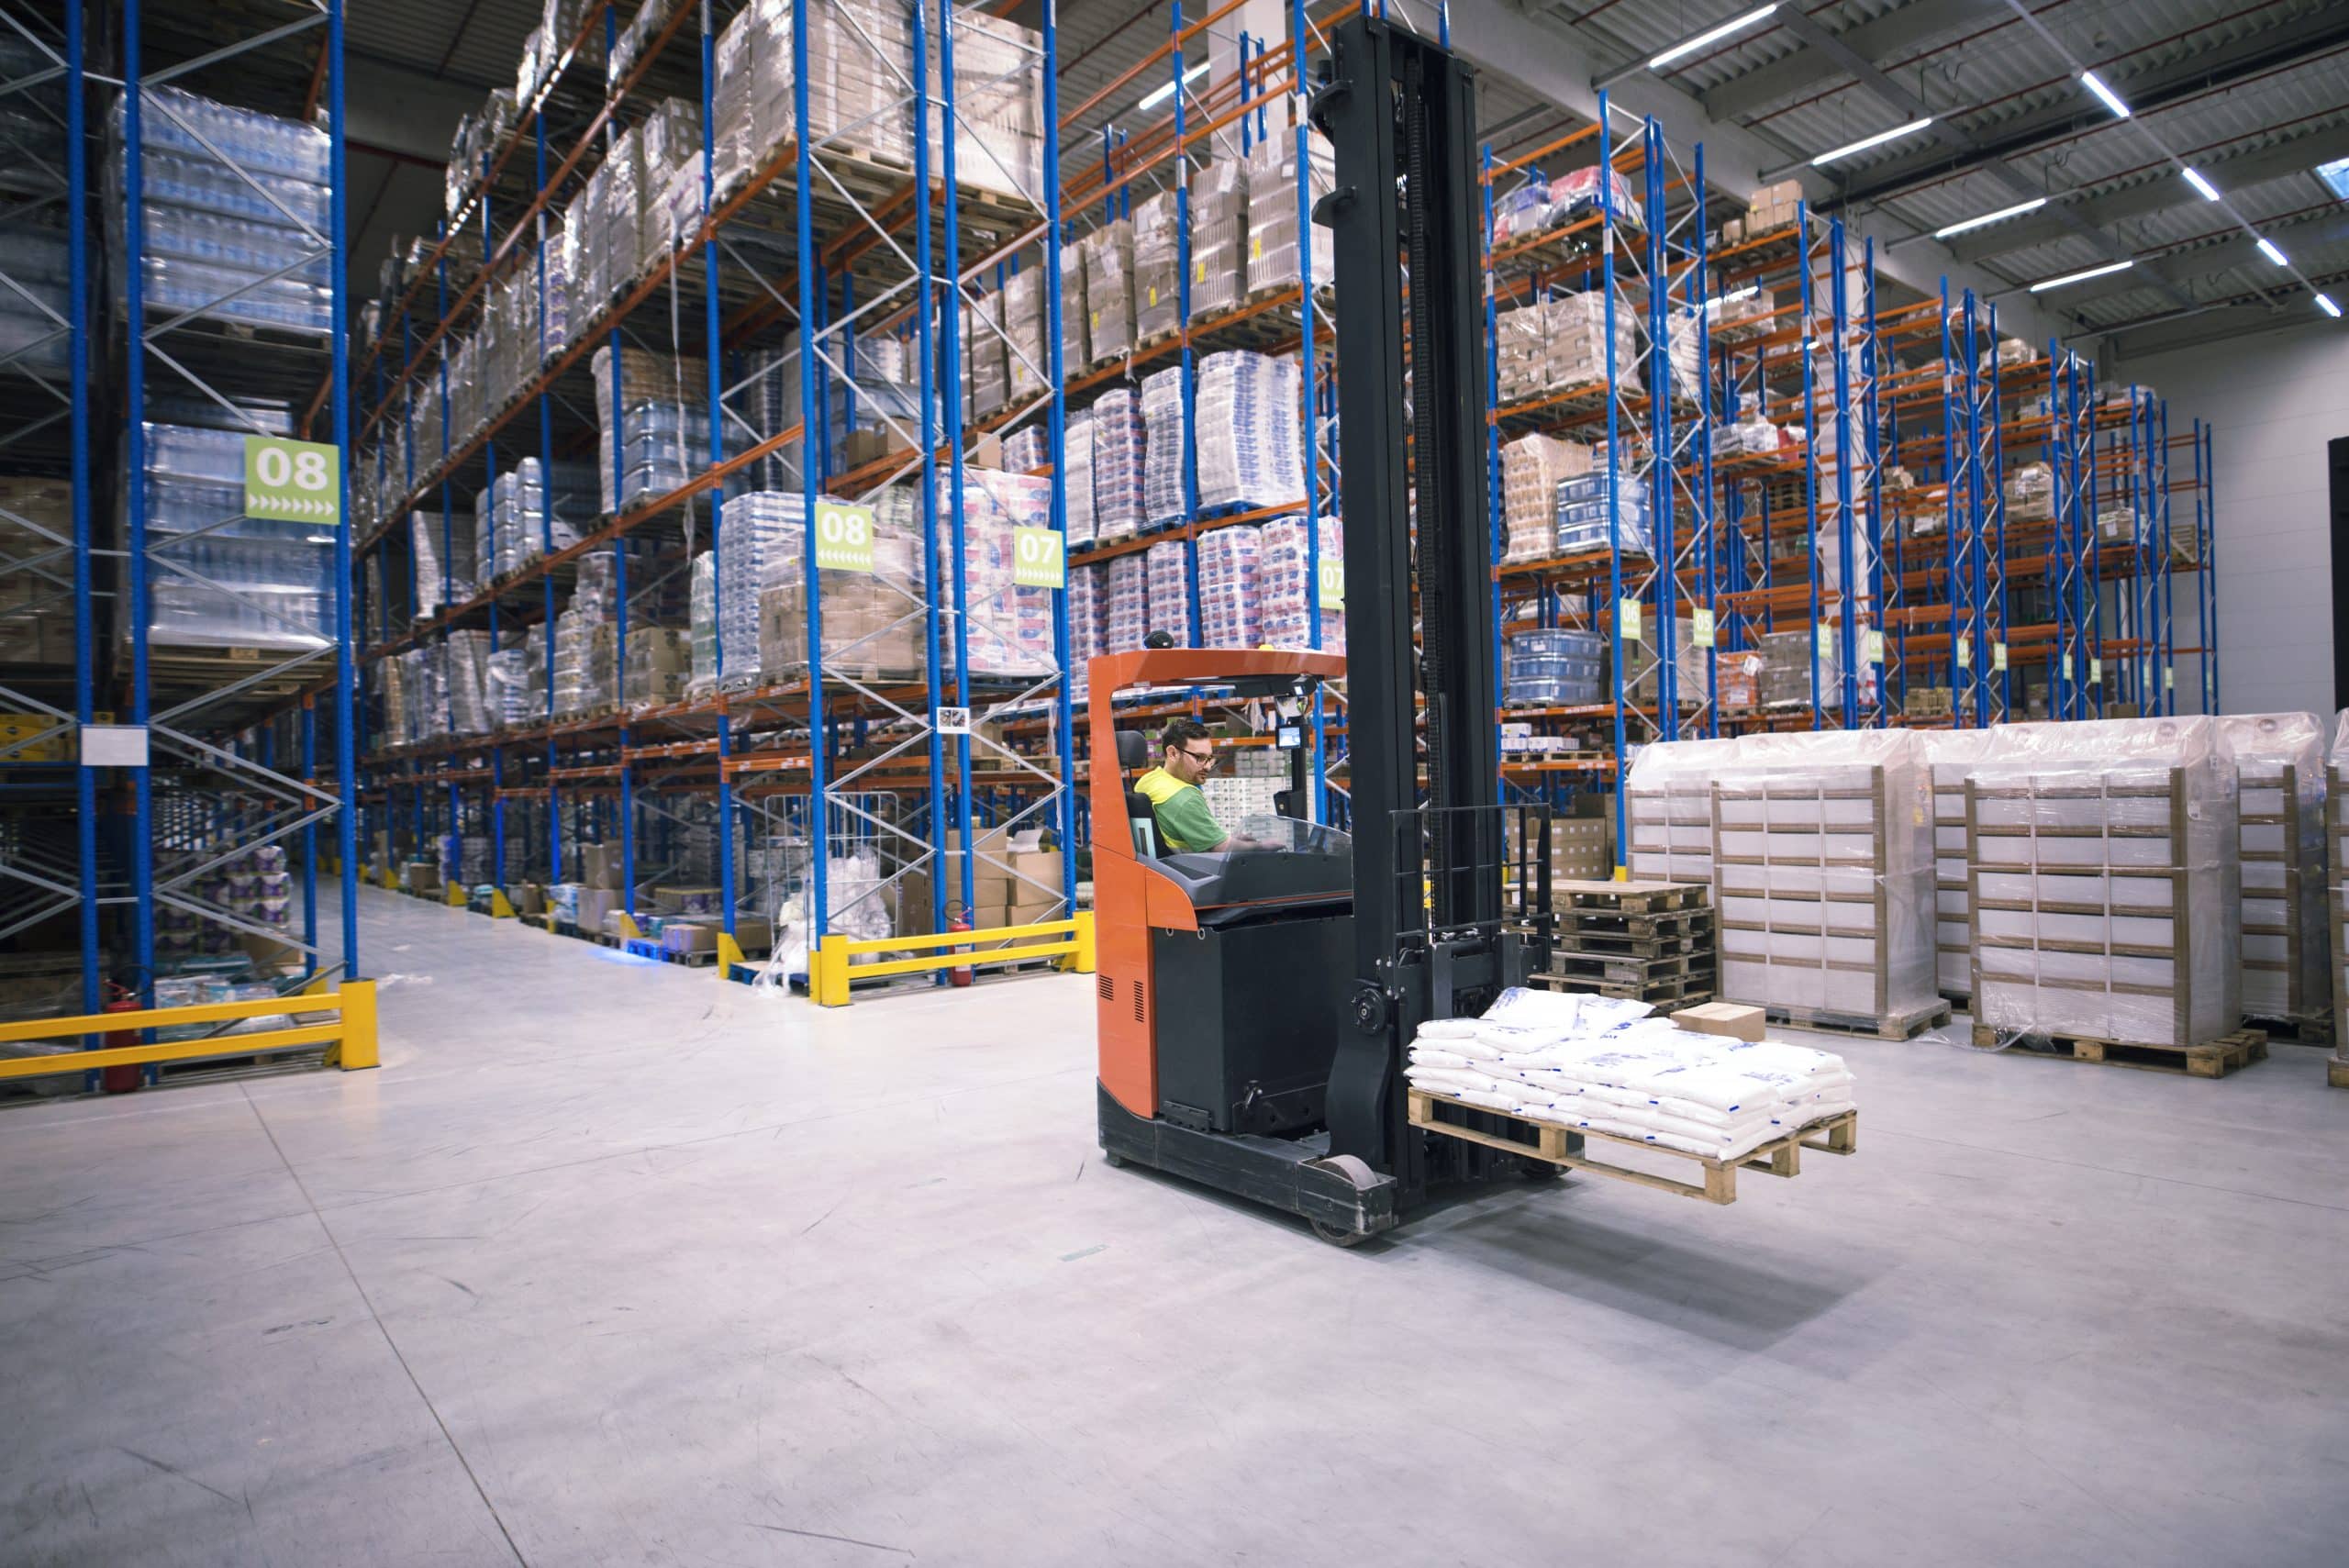 Worker operating forklift machine and relocating goods in large warehouse centre.